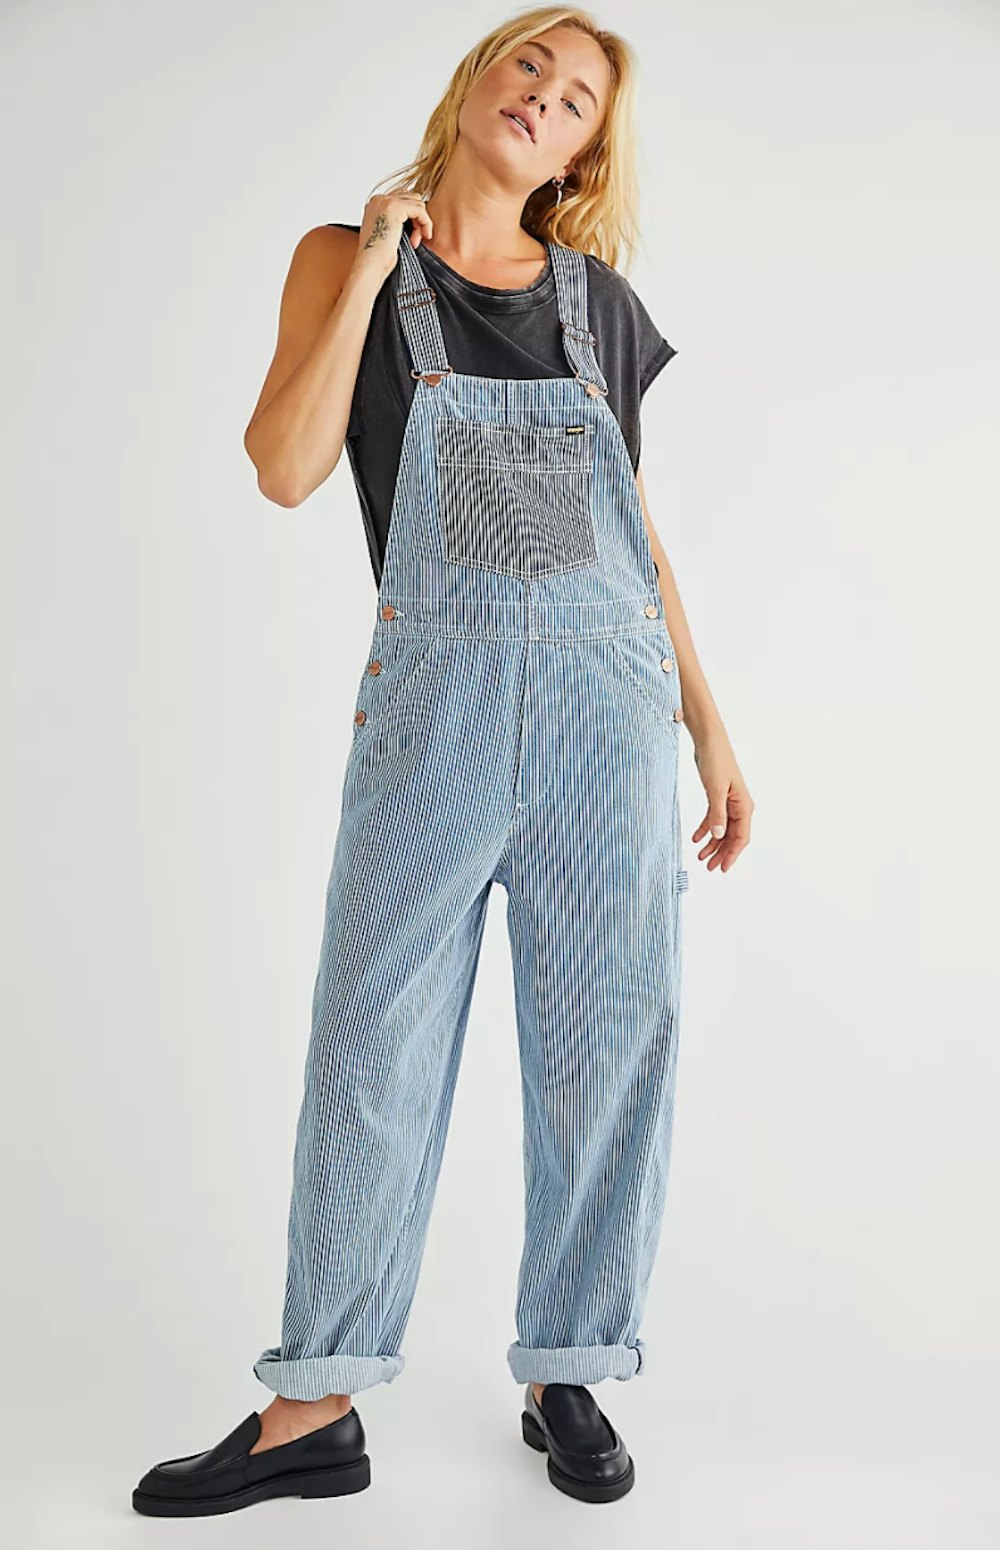 5 Fall Denim Trends To Shop Now, From Low-Rise To Dad Jeans